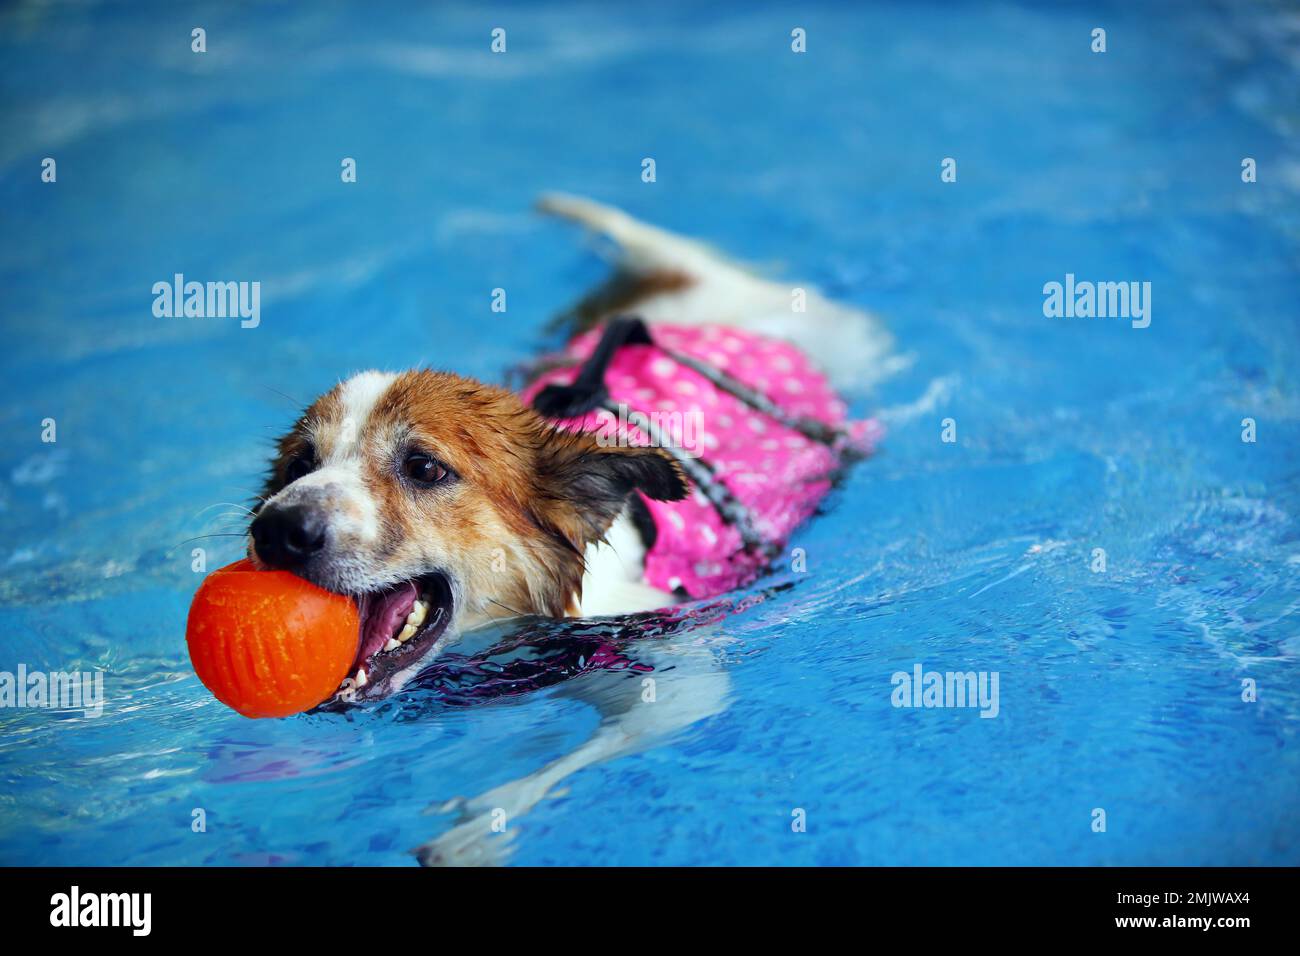 Dog wearing life jacket and holding toy in mouth in the pool. Dog swimming. Stock Photo